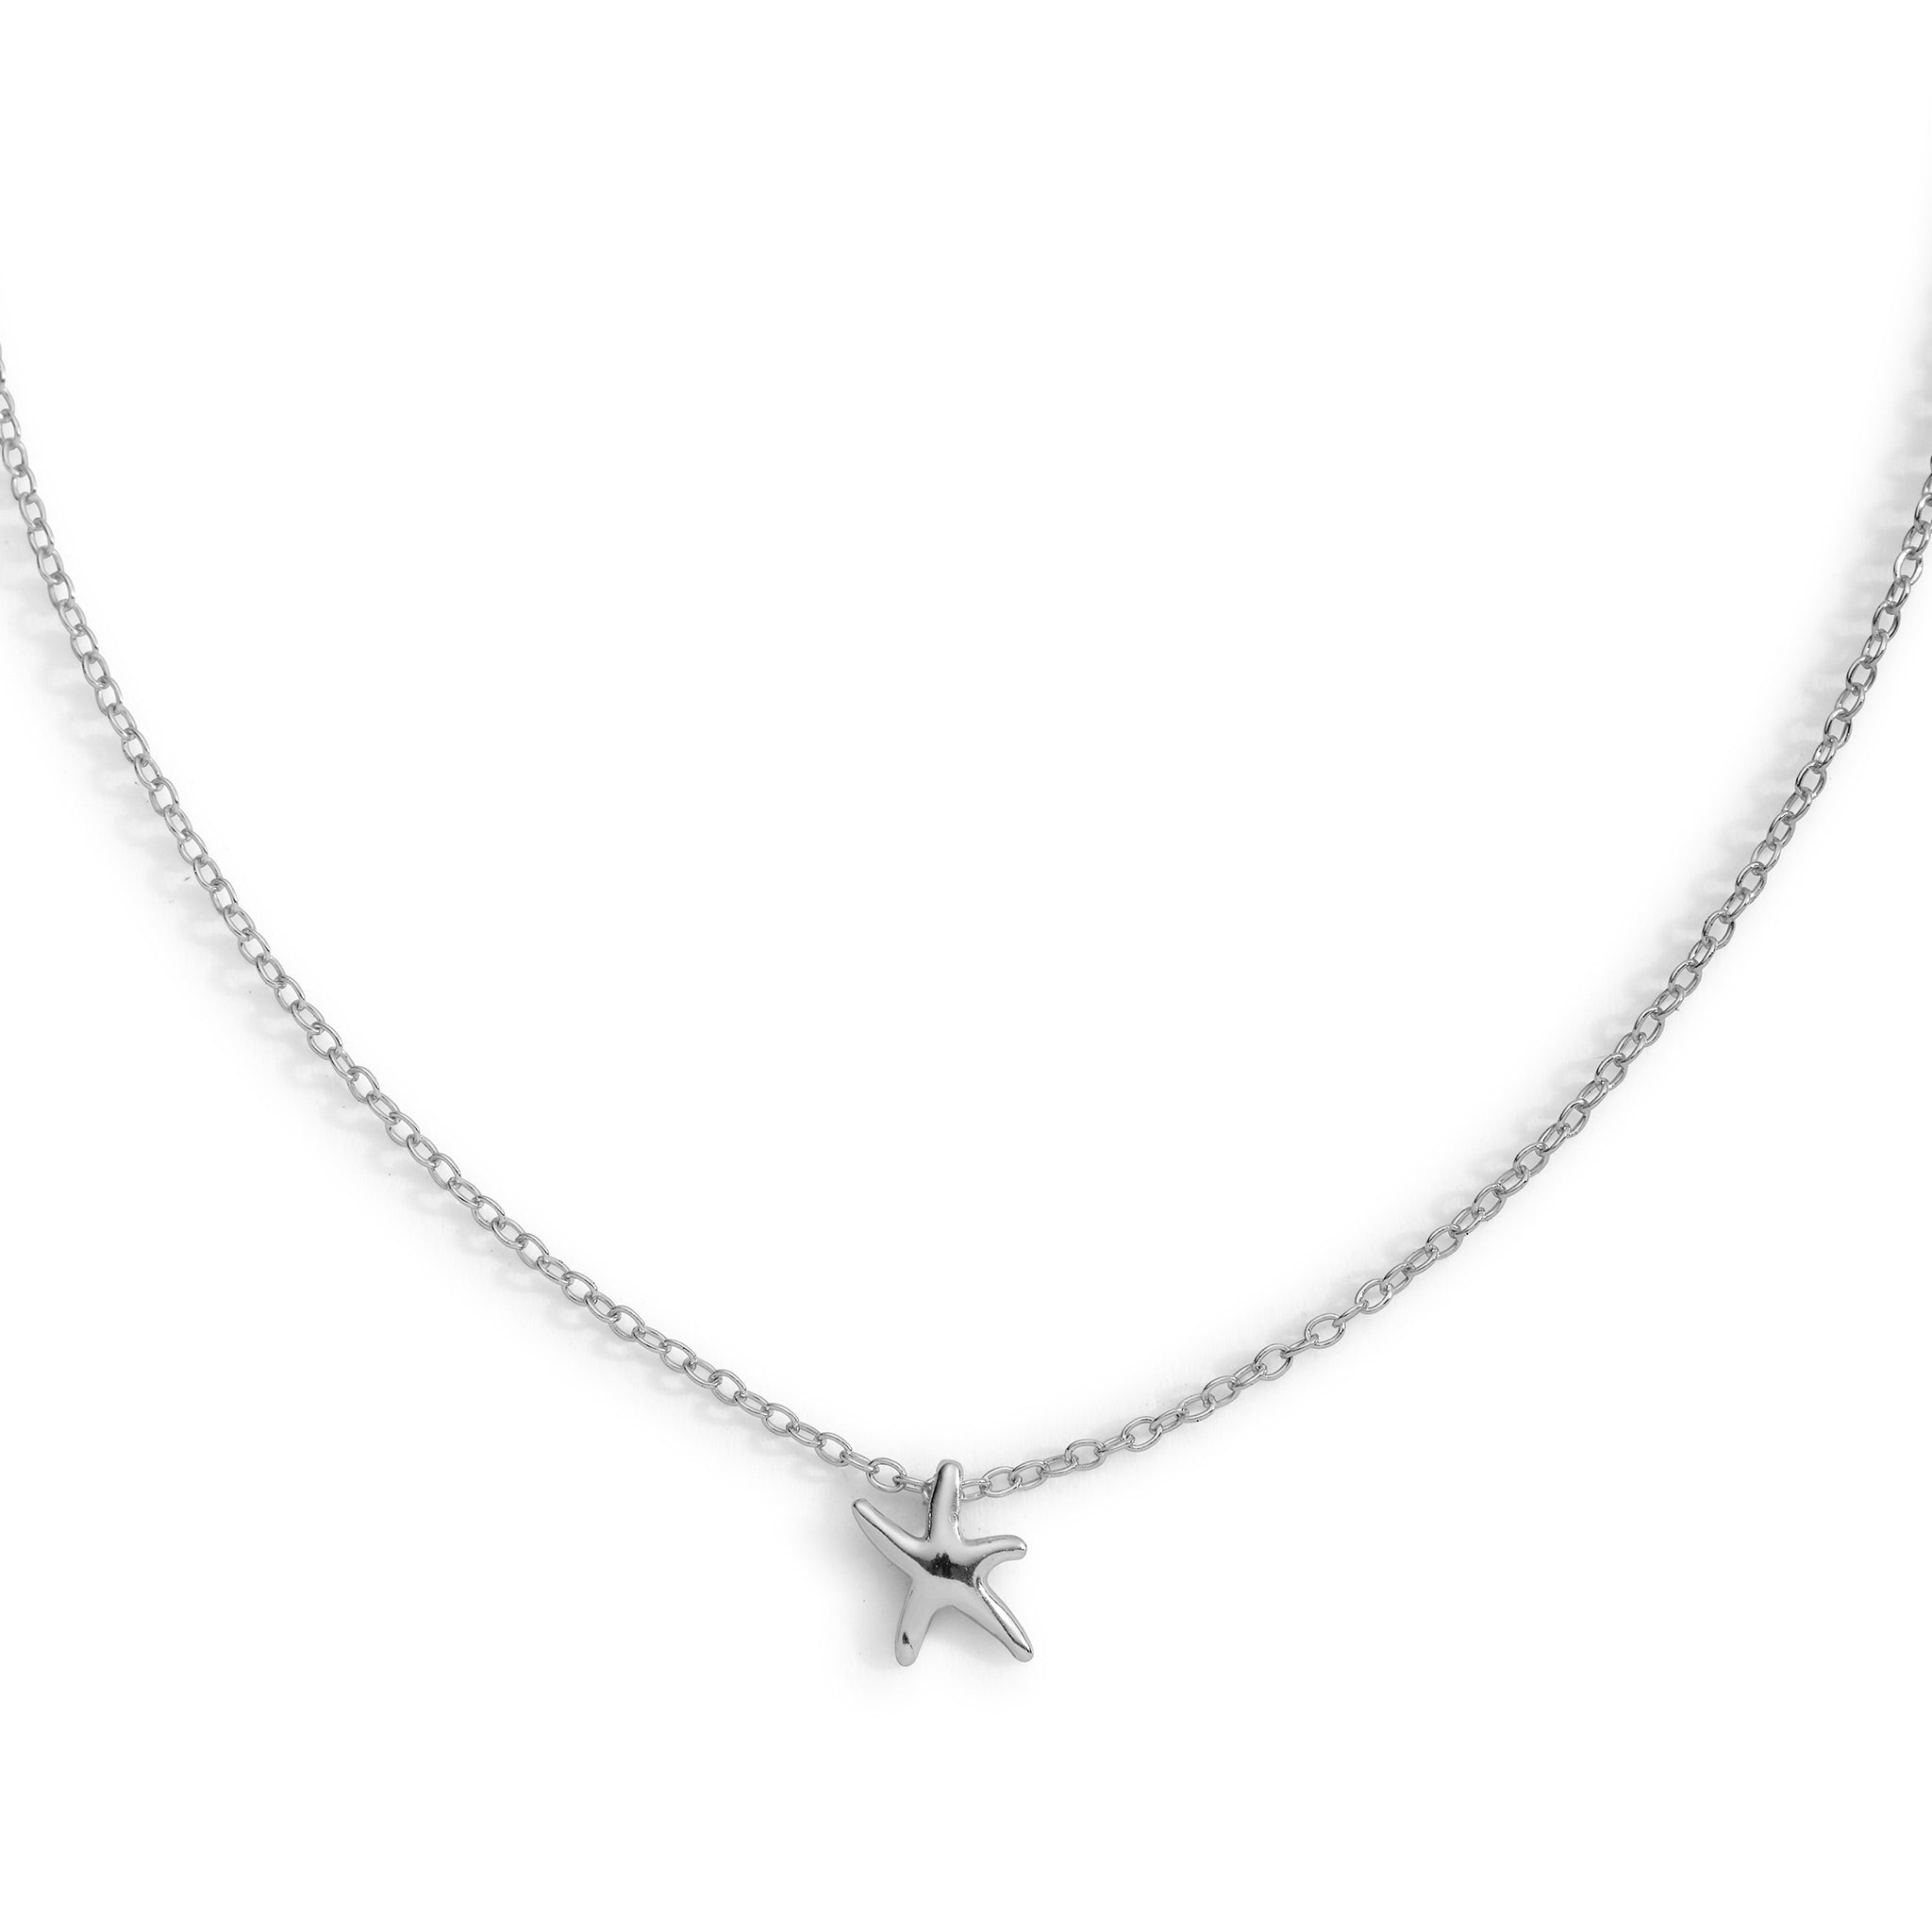 THE MAKERY STERLING SILVER STARFISH NECKLACE